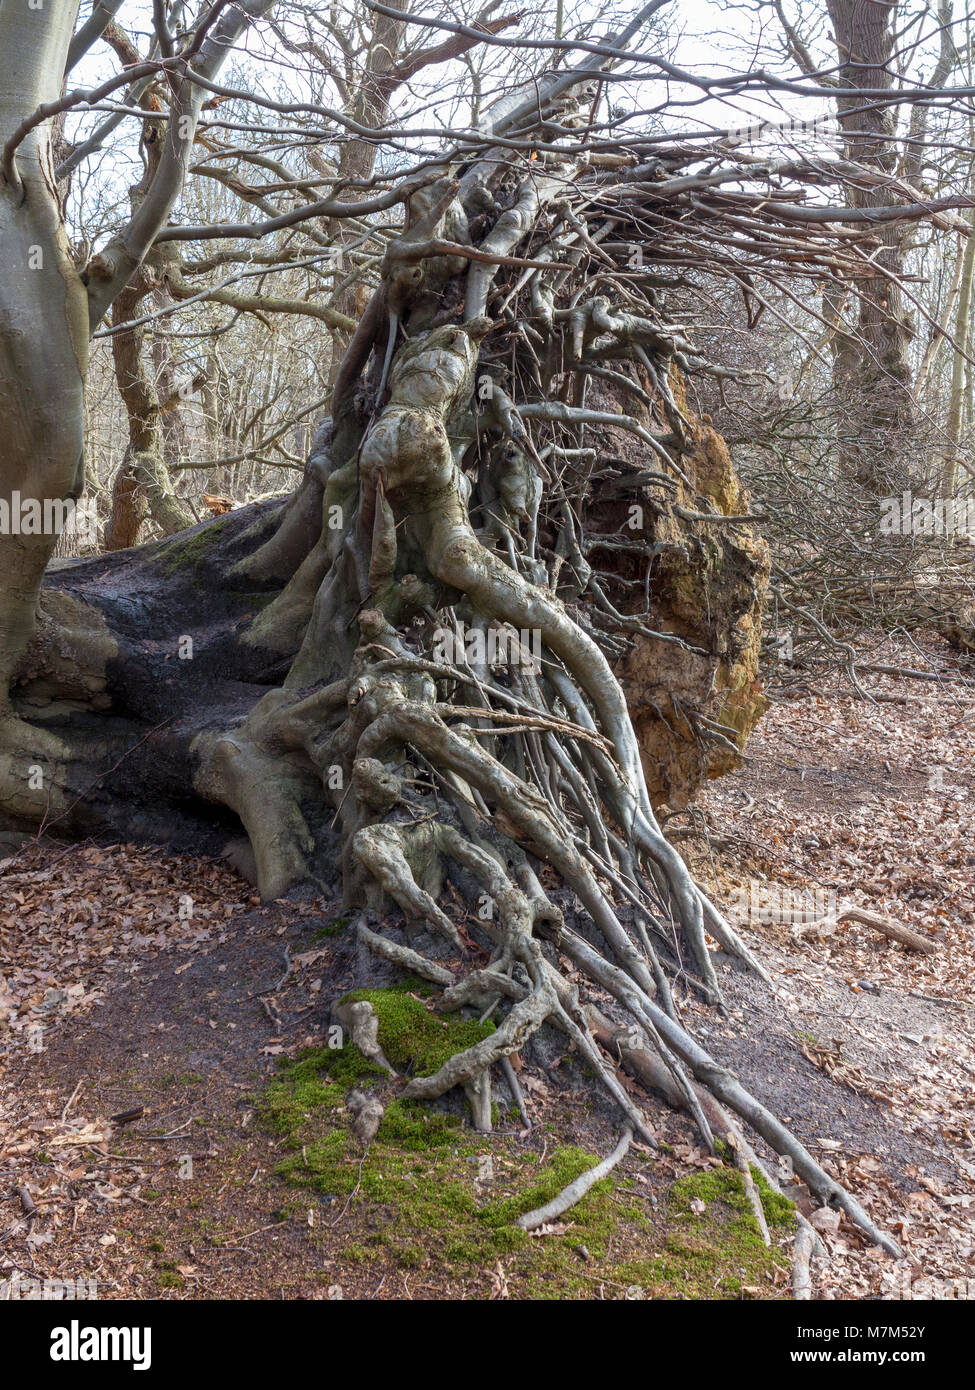 Ancient fallen tree with extensive root bole exposed Stock Photo